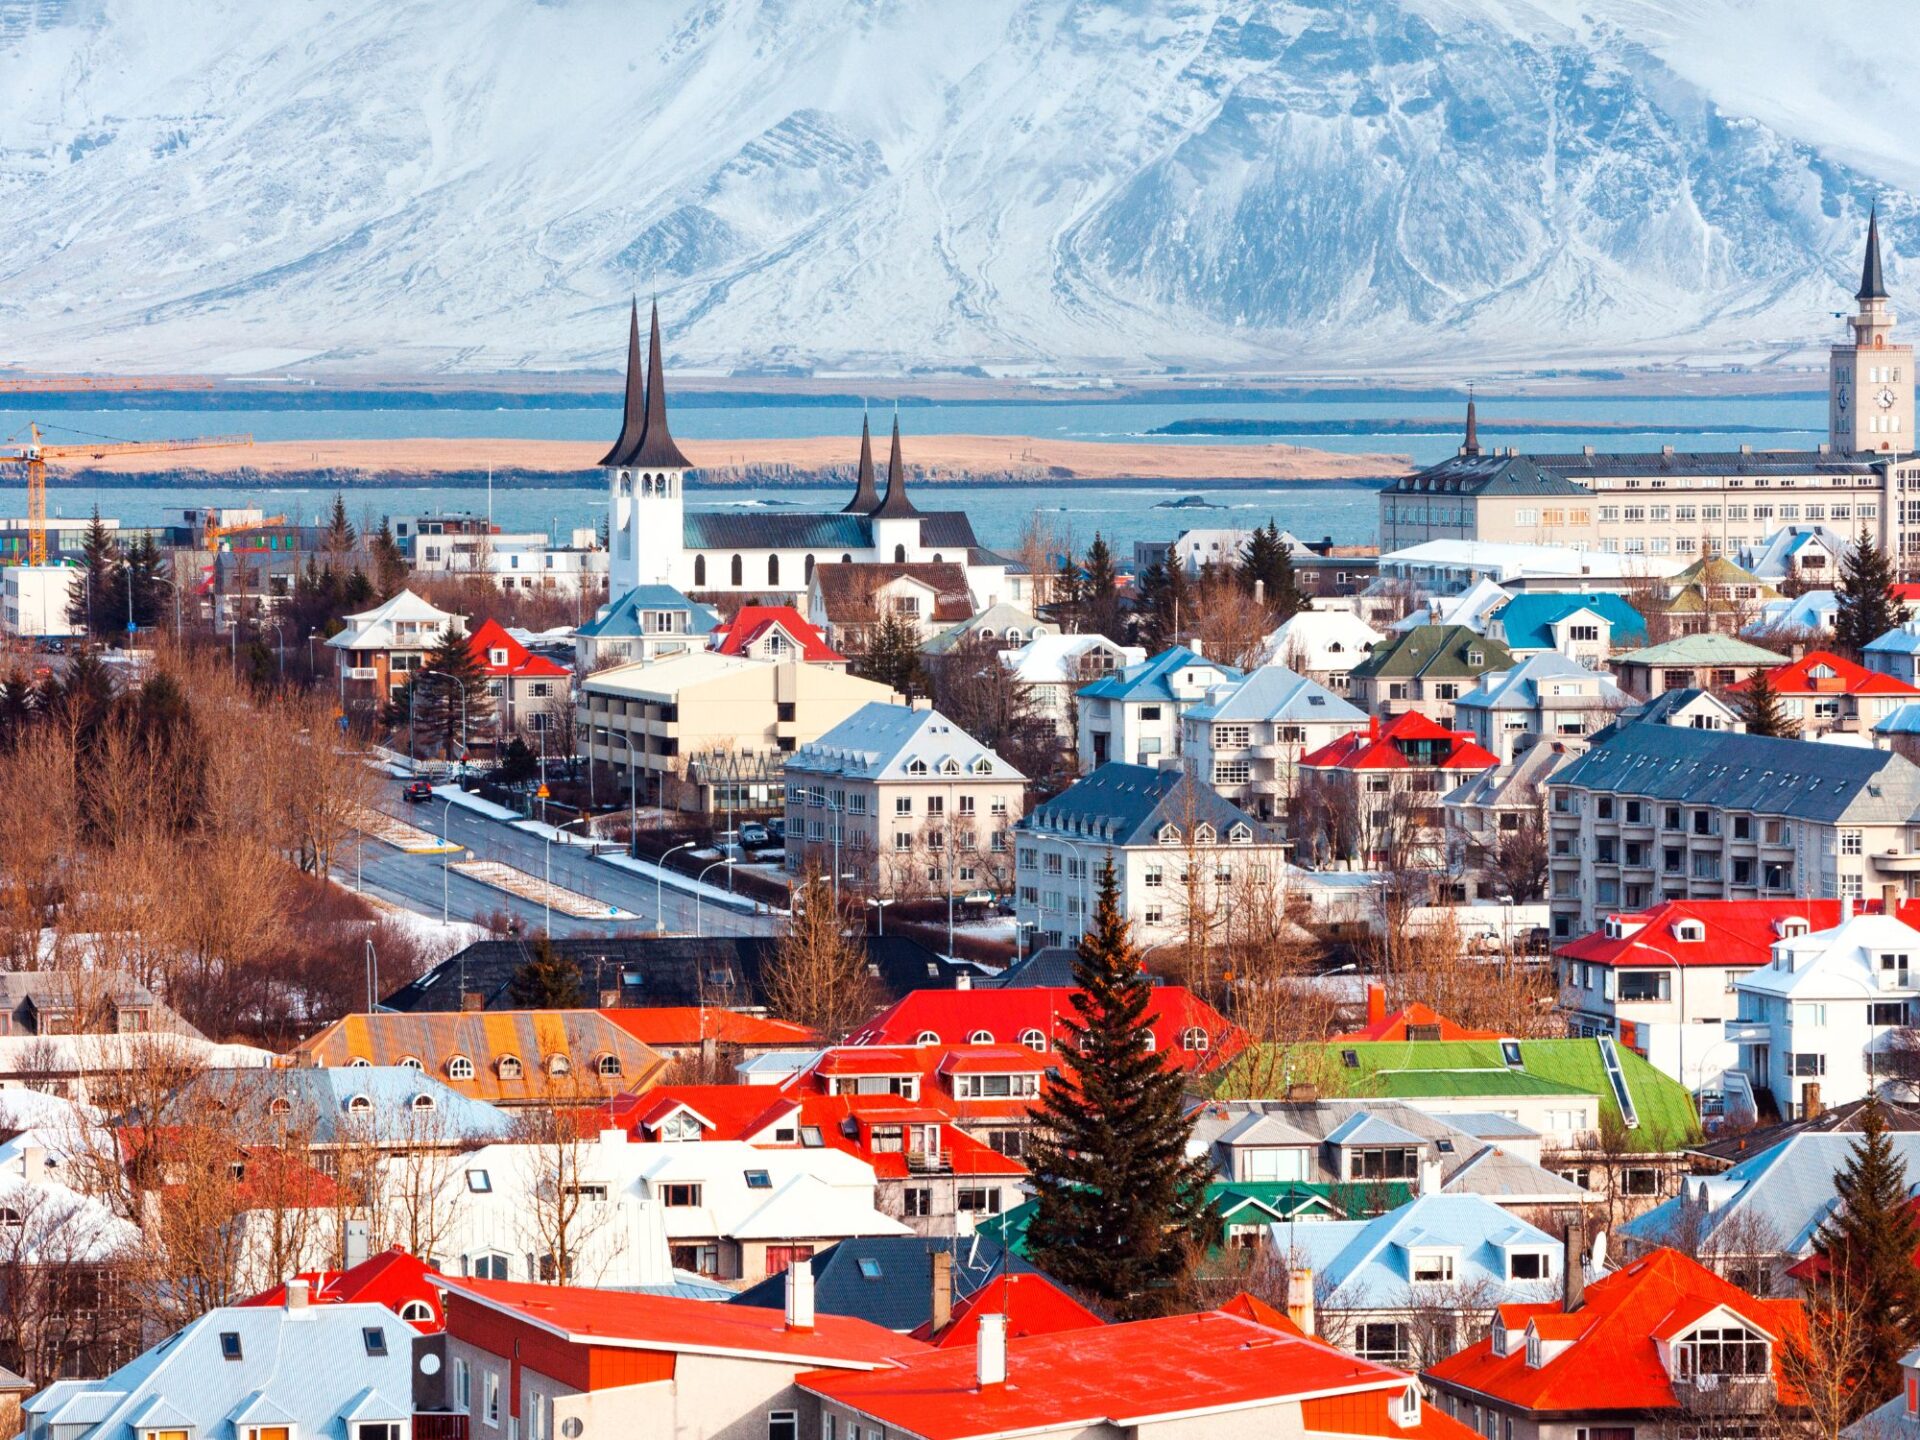 Best European Countries To Visit in Summer from UAE - Iceland